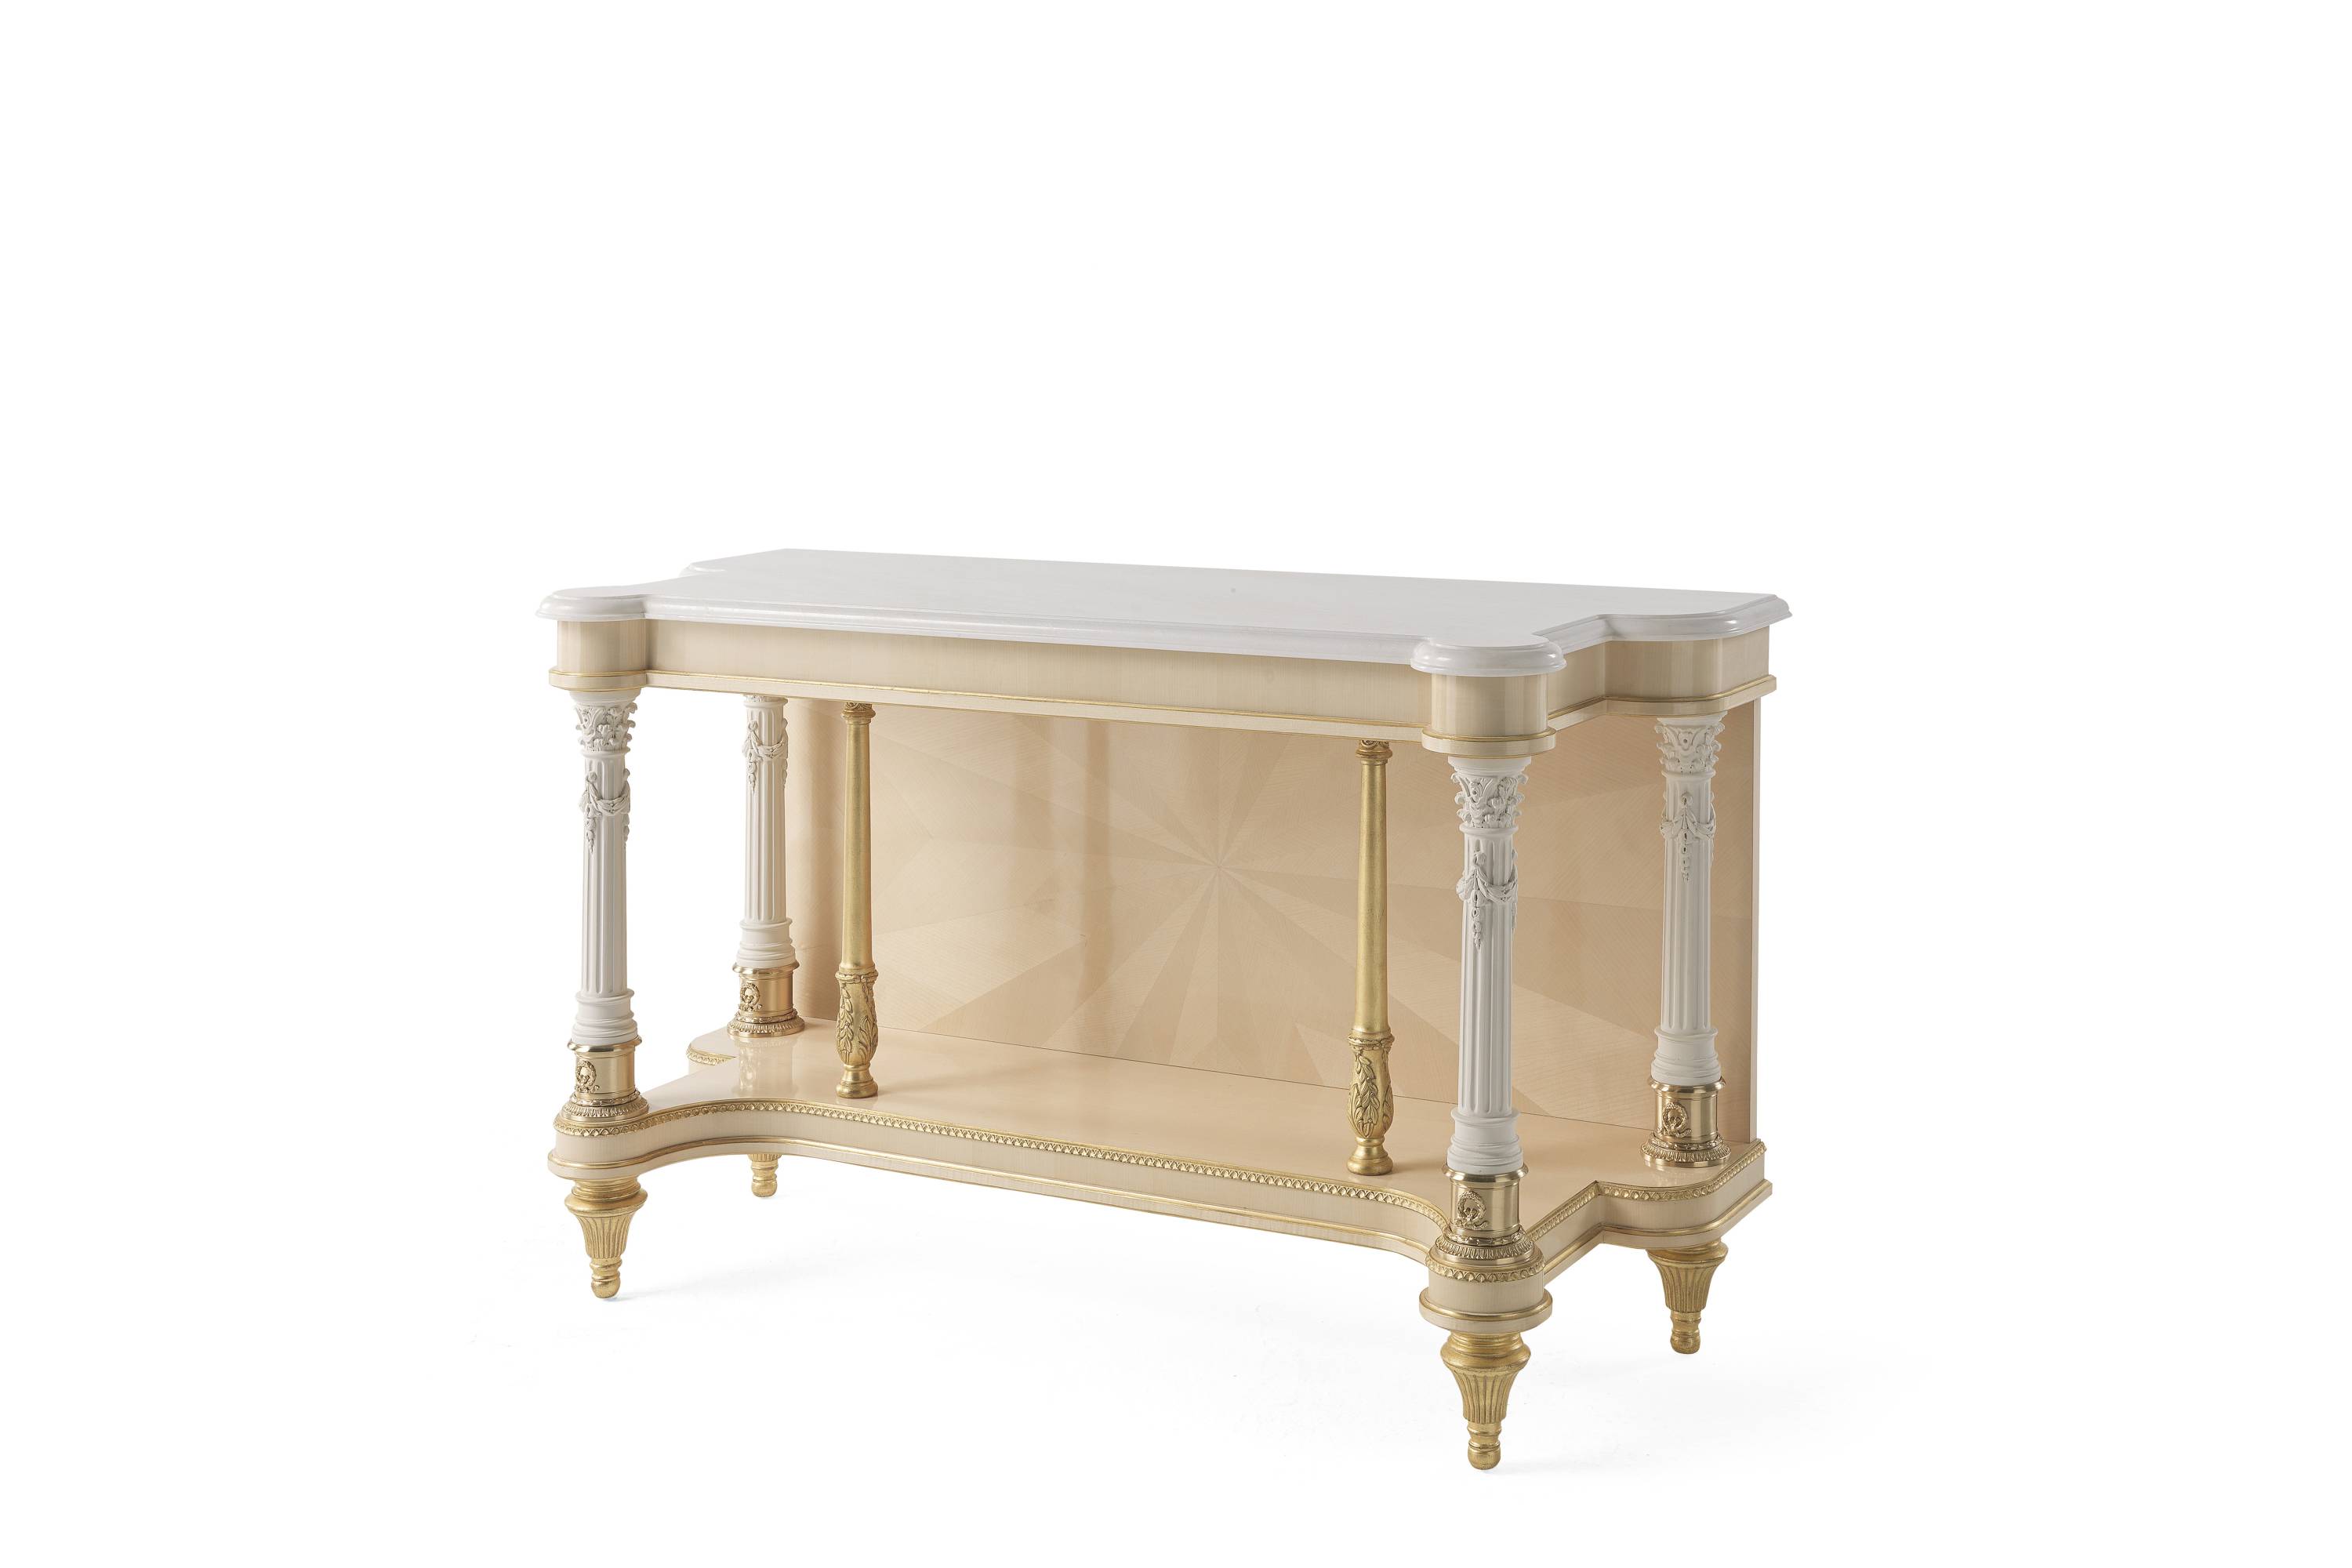 TOULOUSE console - A luxury experience with the Héritage collection and its classic luxurious furniture